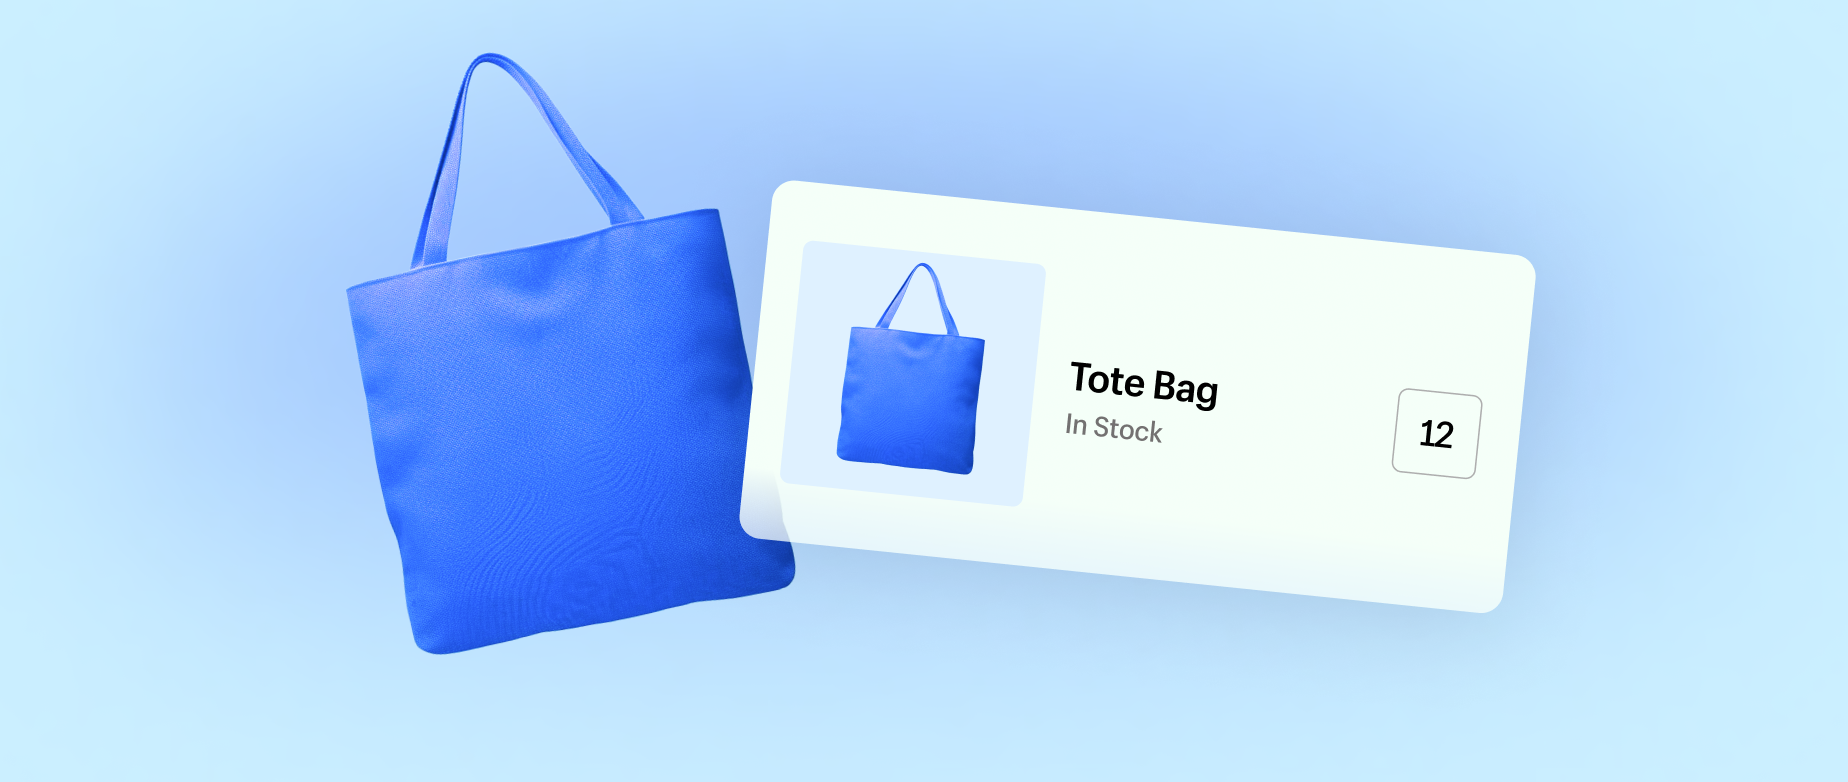 An image showing 12 blue tote bags in stock on a light blue background.